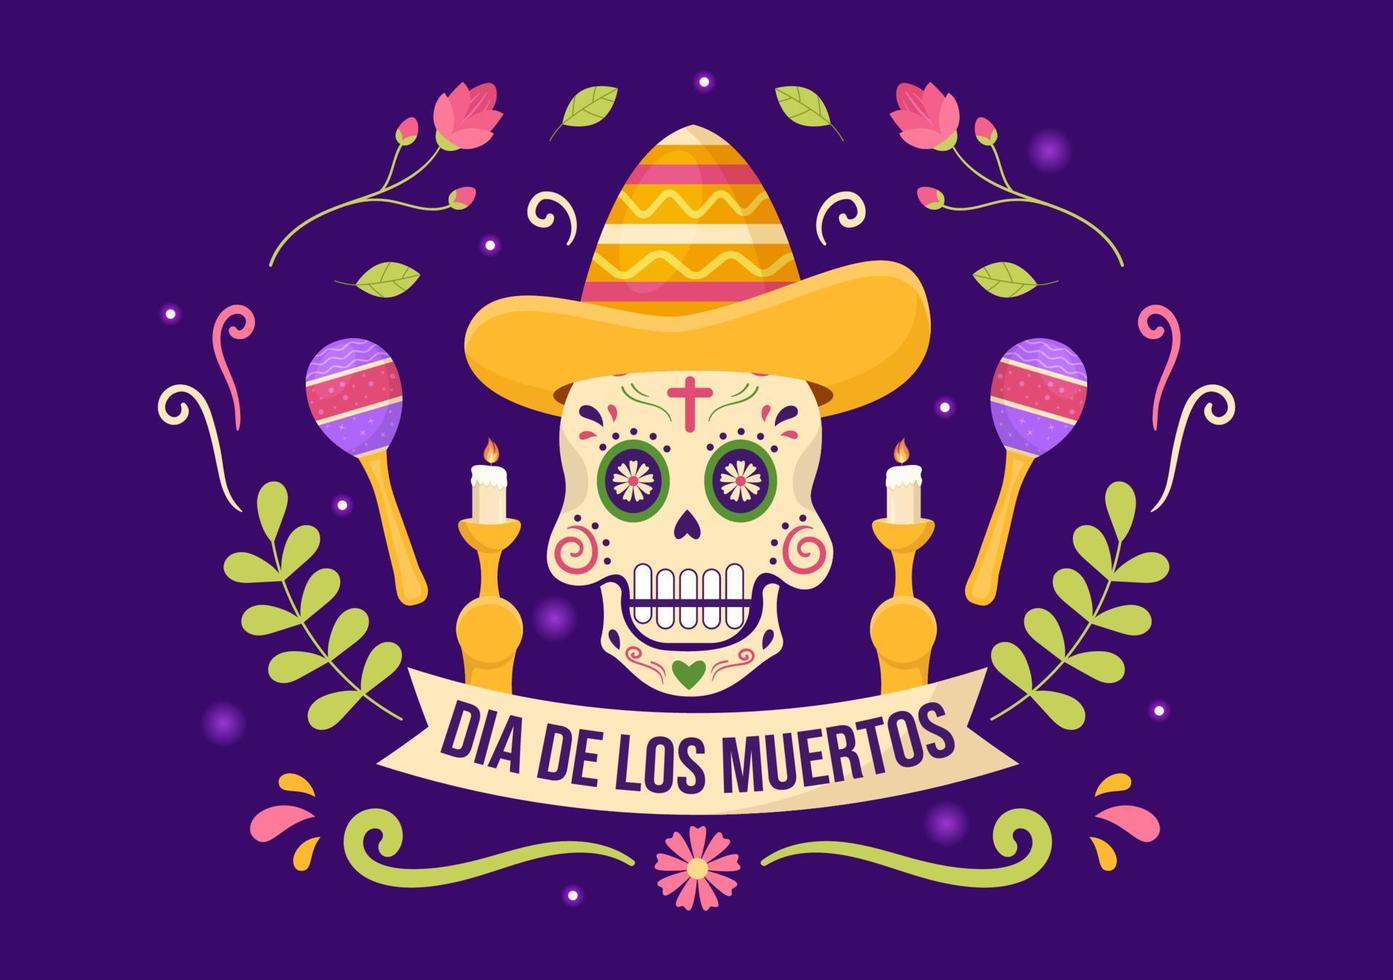 Dia De Los Muertos or Day of the Dead Template Hand Drawn Cartoon Flat Illustration Mexican Holiday Festival with Tattoo Skulls, Maracas and Sombrero vector